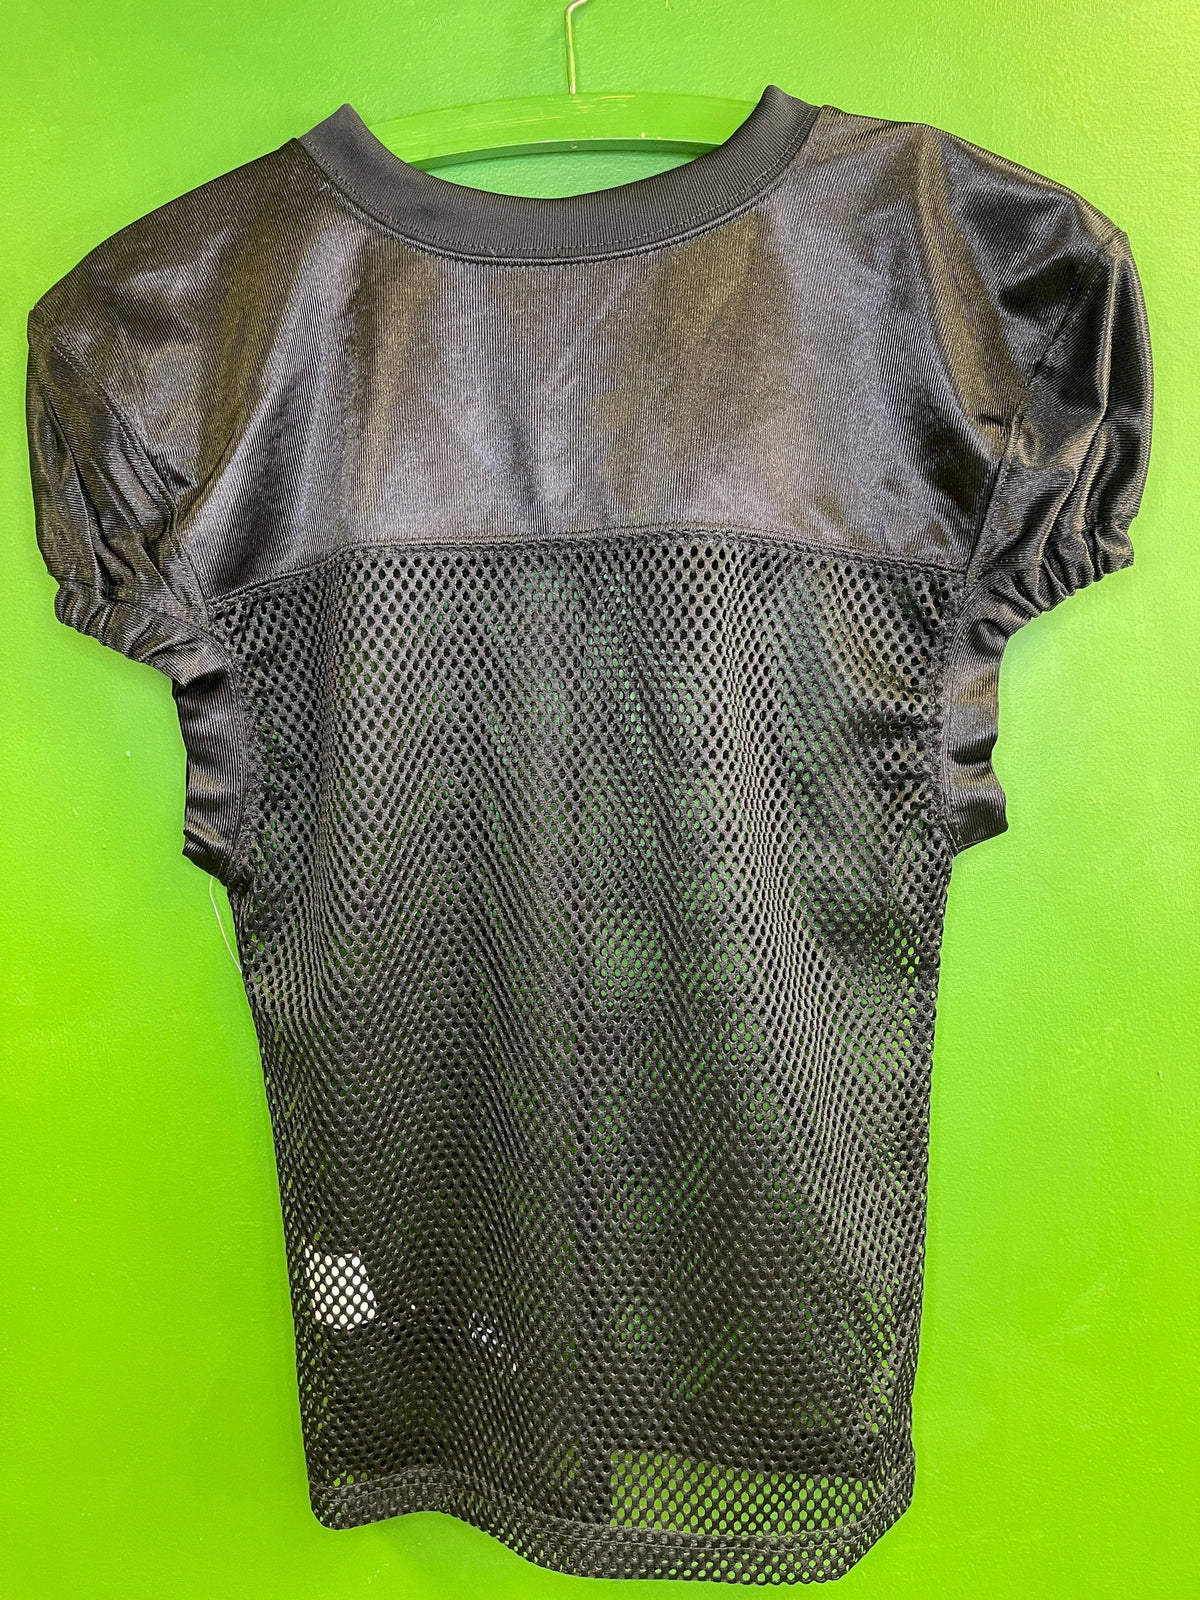 American Football Practise Scrimmage Jersey Youth Medium 10-12